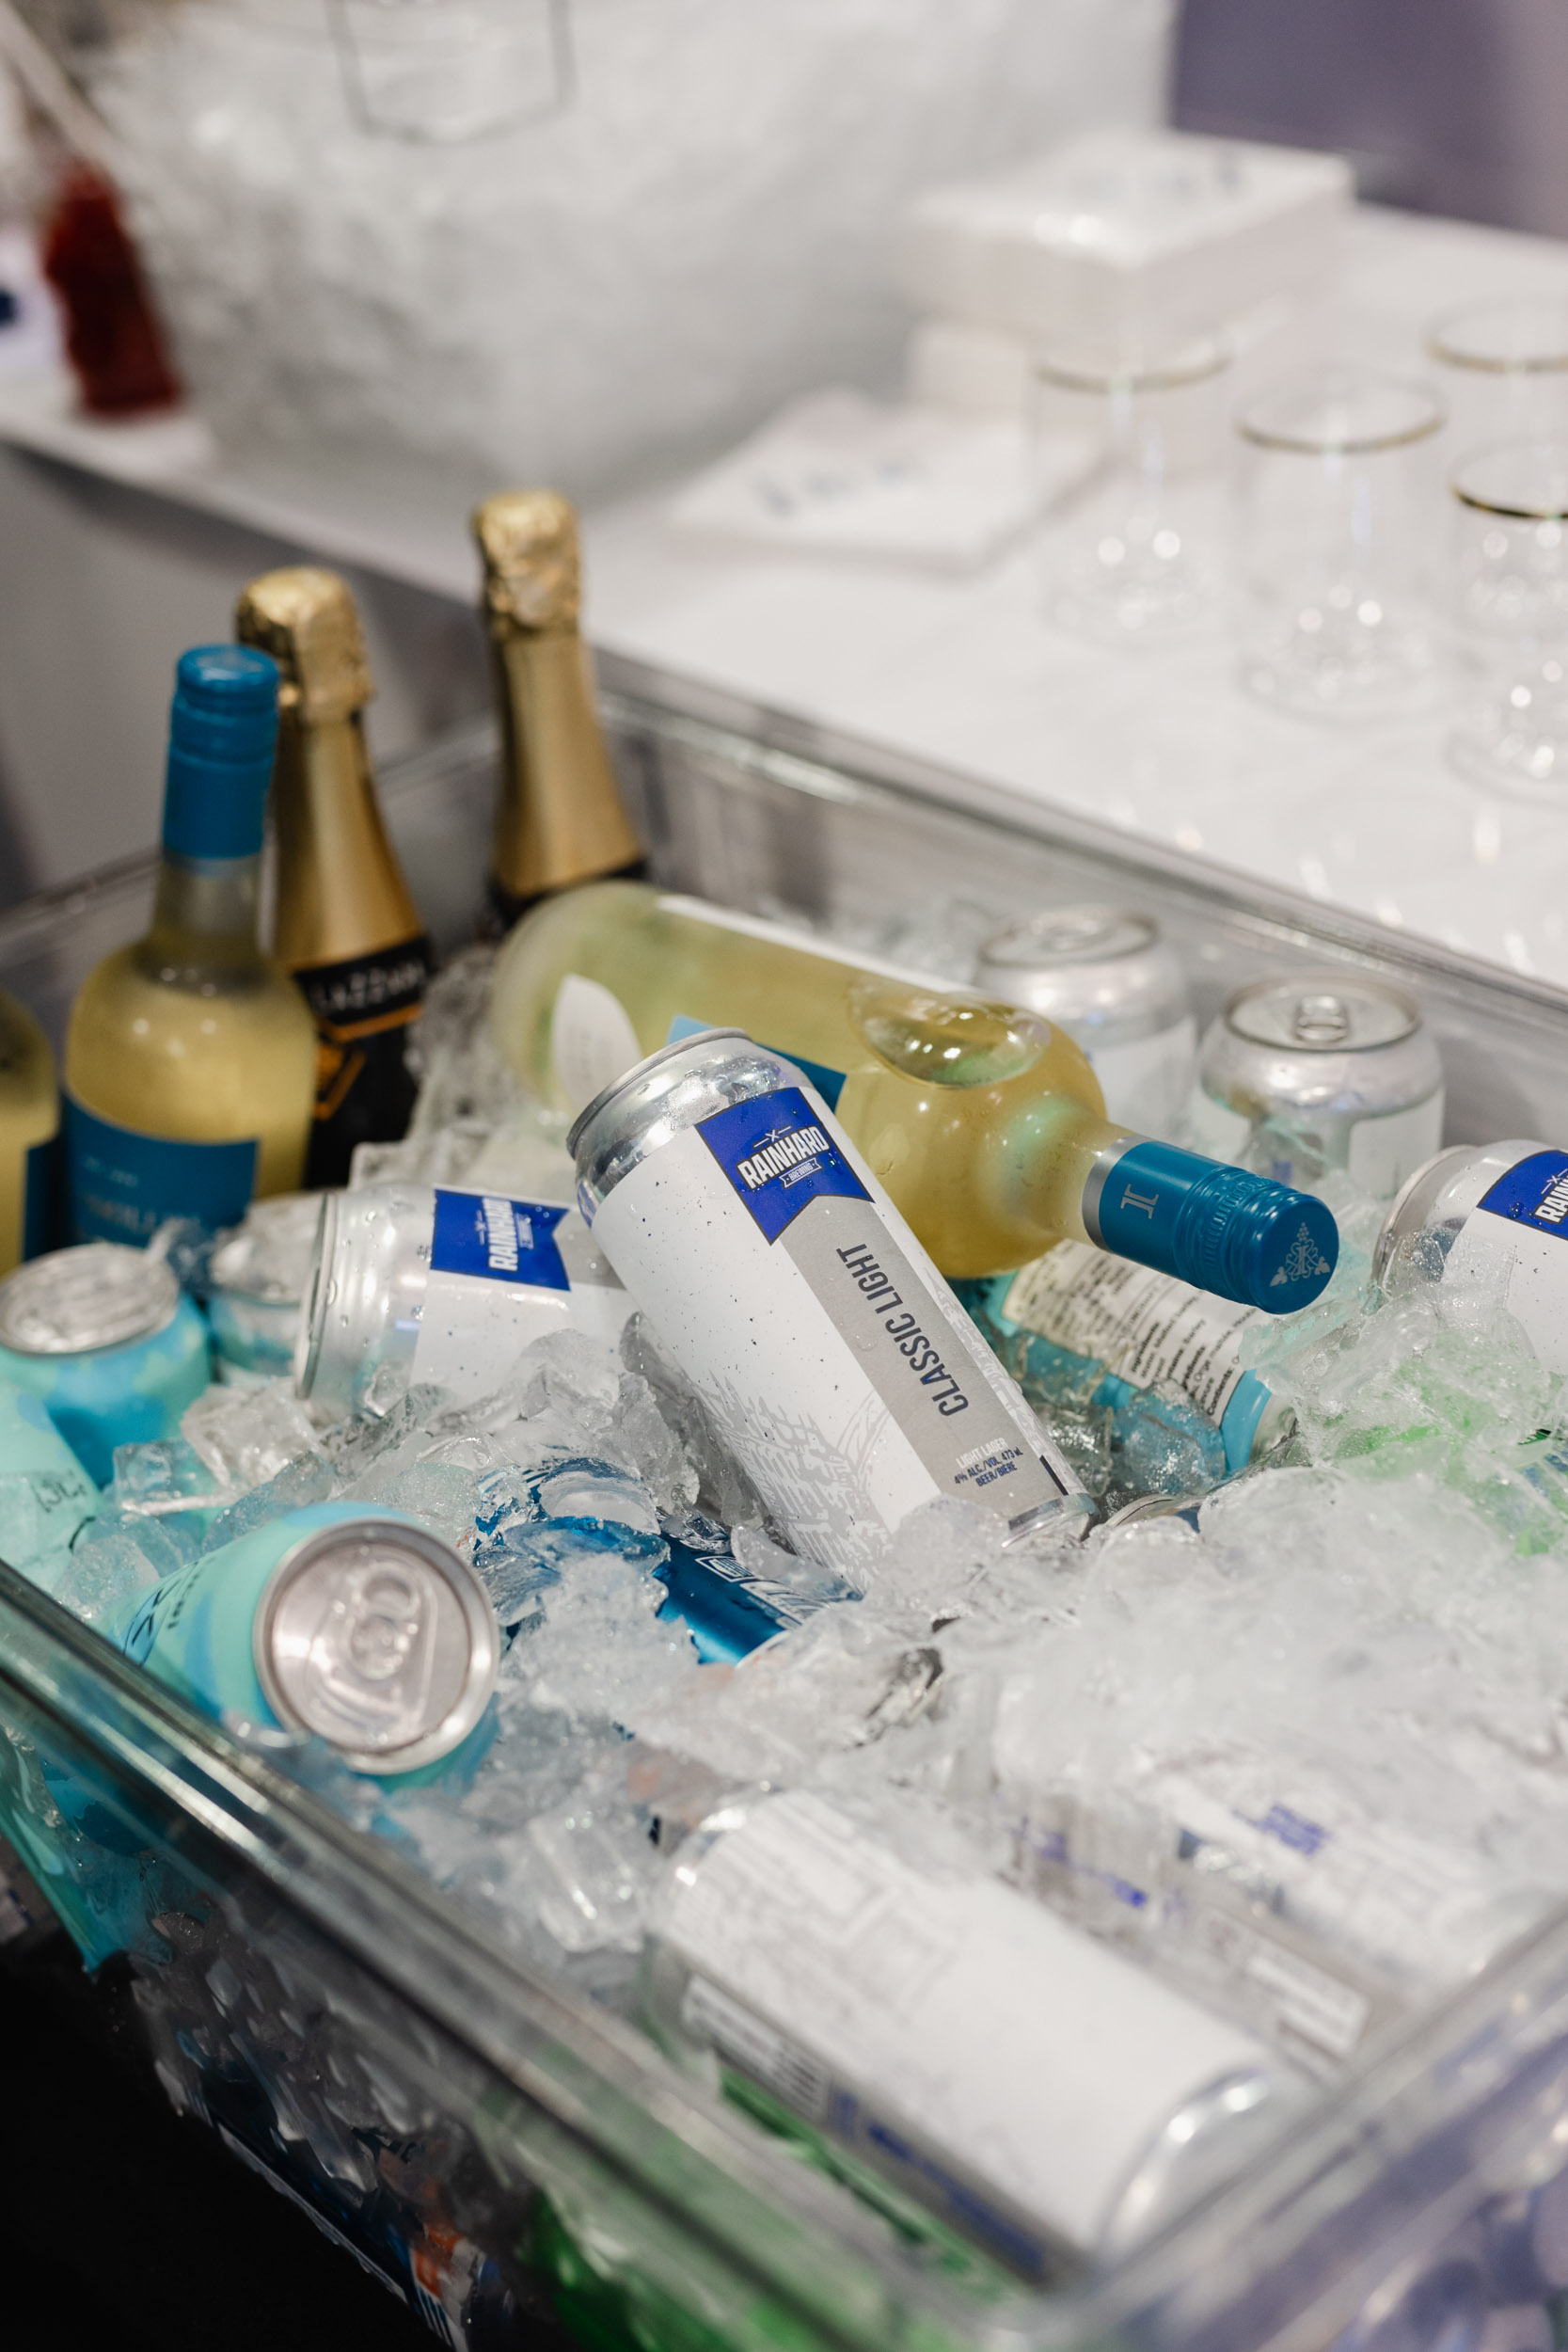 Toronto Trade show photography: An ice tray filled with cans and bottles captured in stunning images.